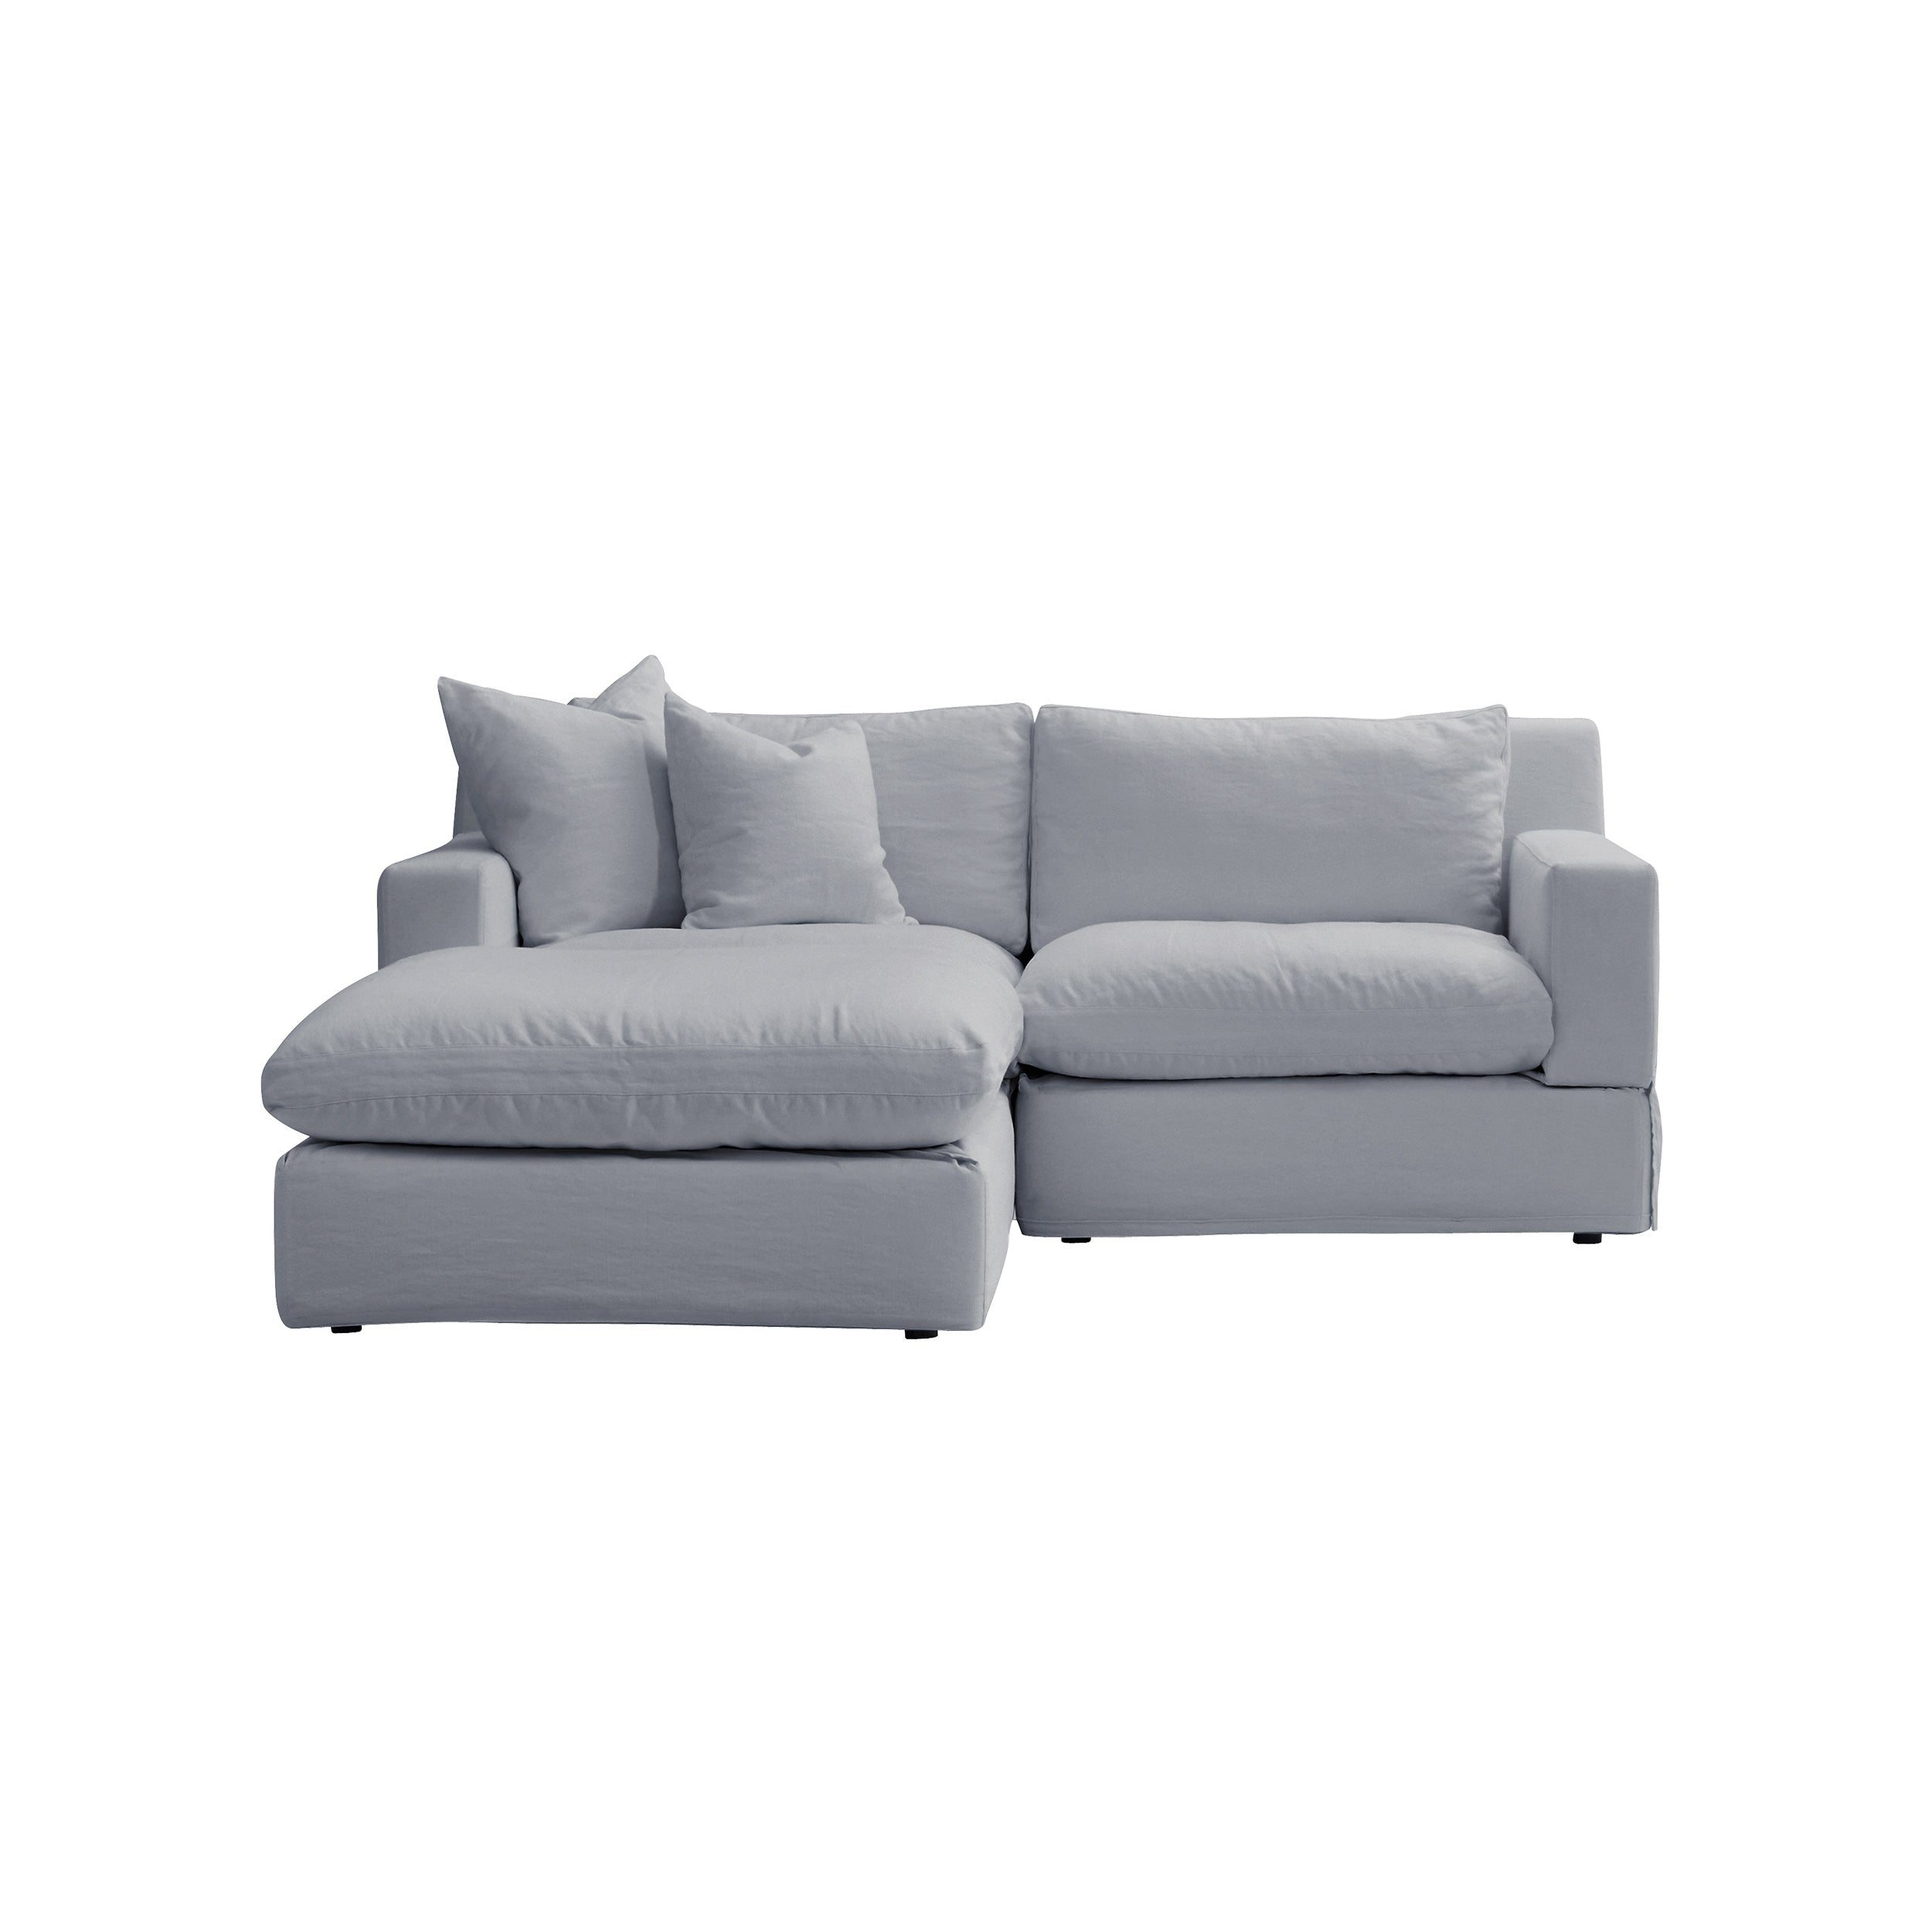 two seater chaise lounger sofas – stowed